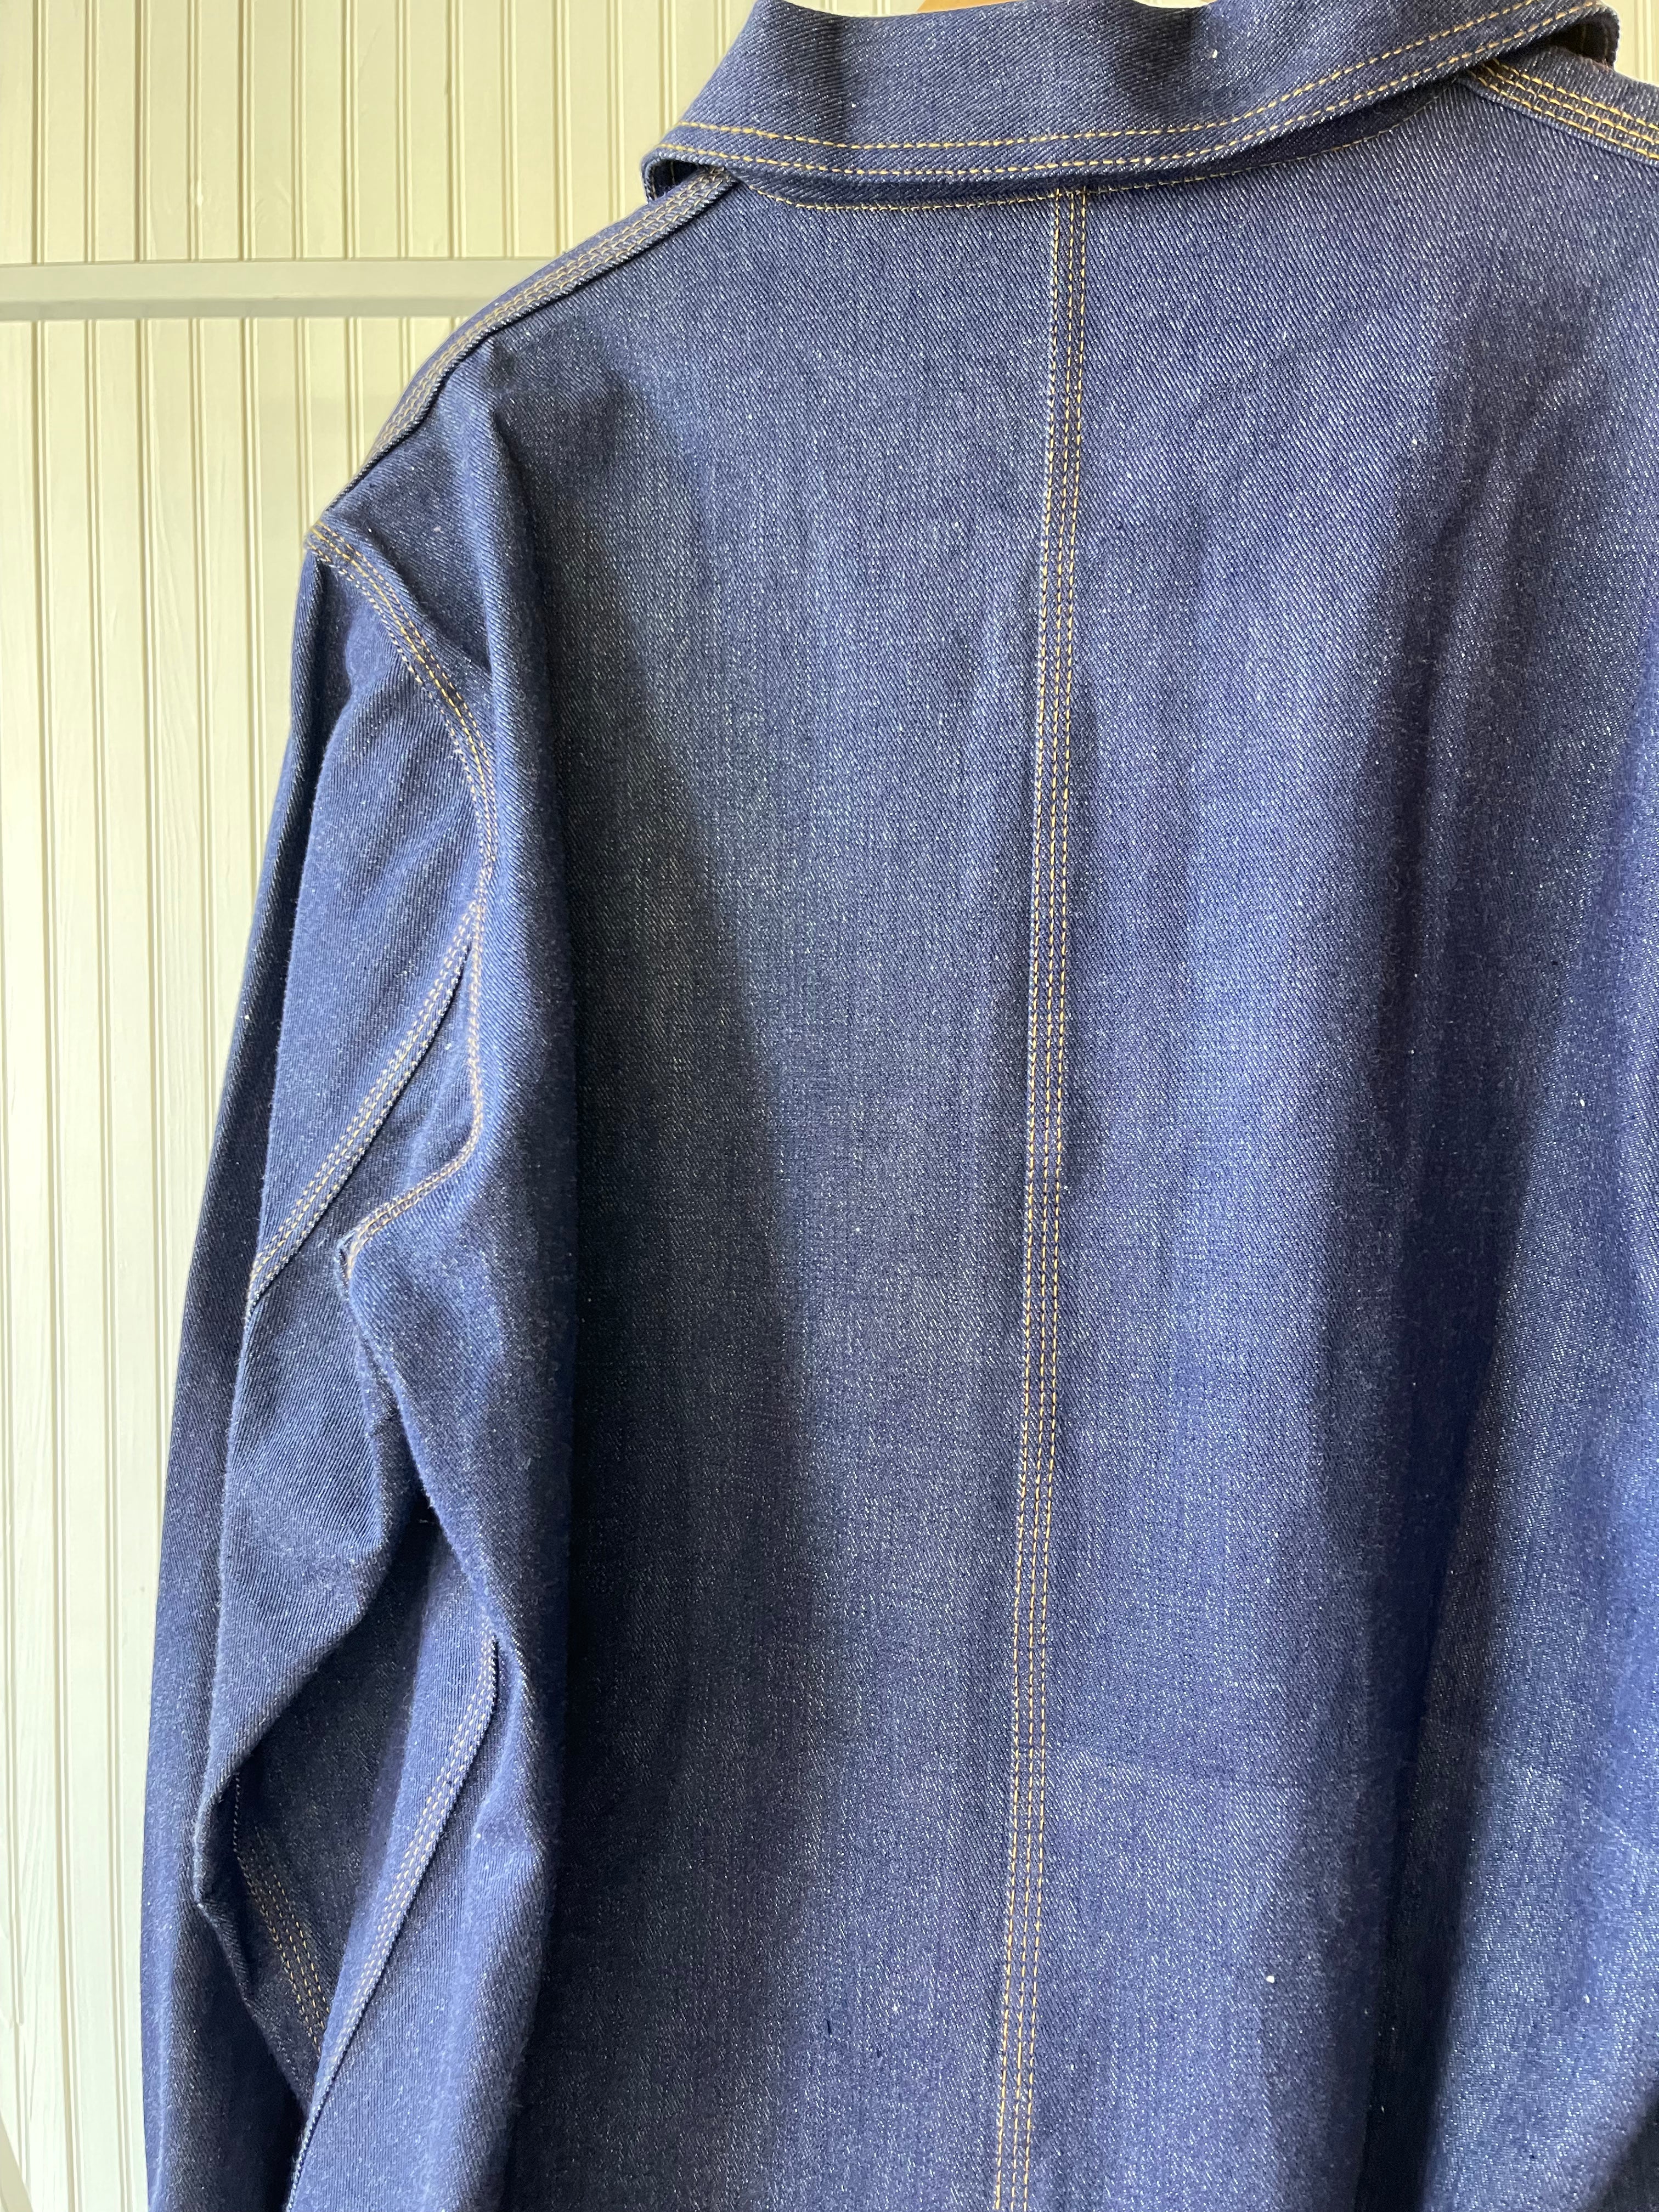 Vintage Deadstock Chinese Denim Chore Coat Unlined – Human Interaction